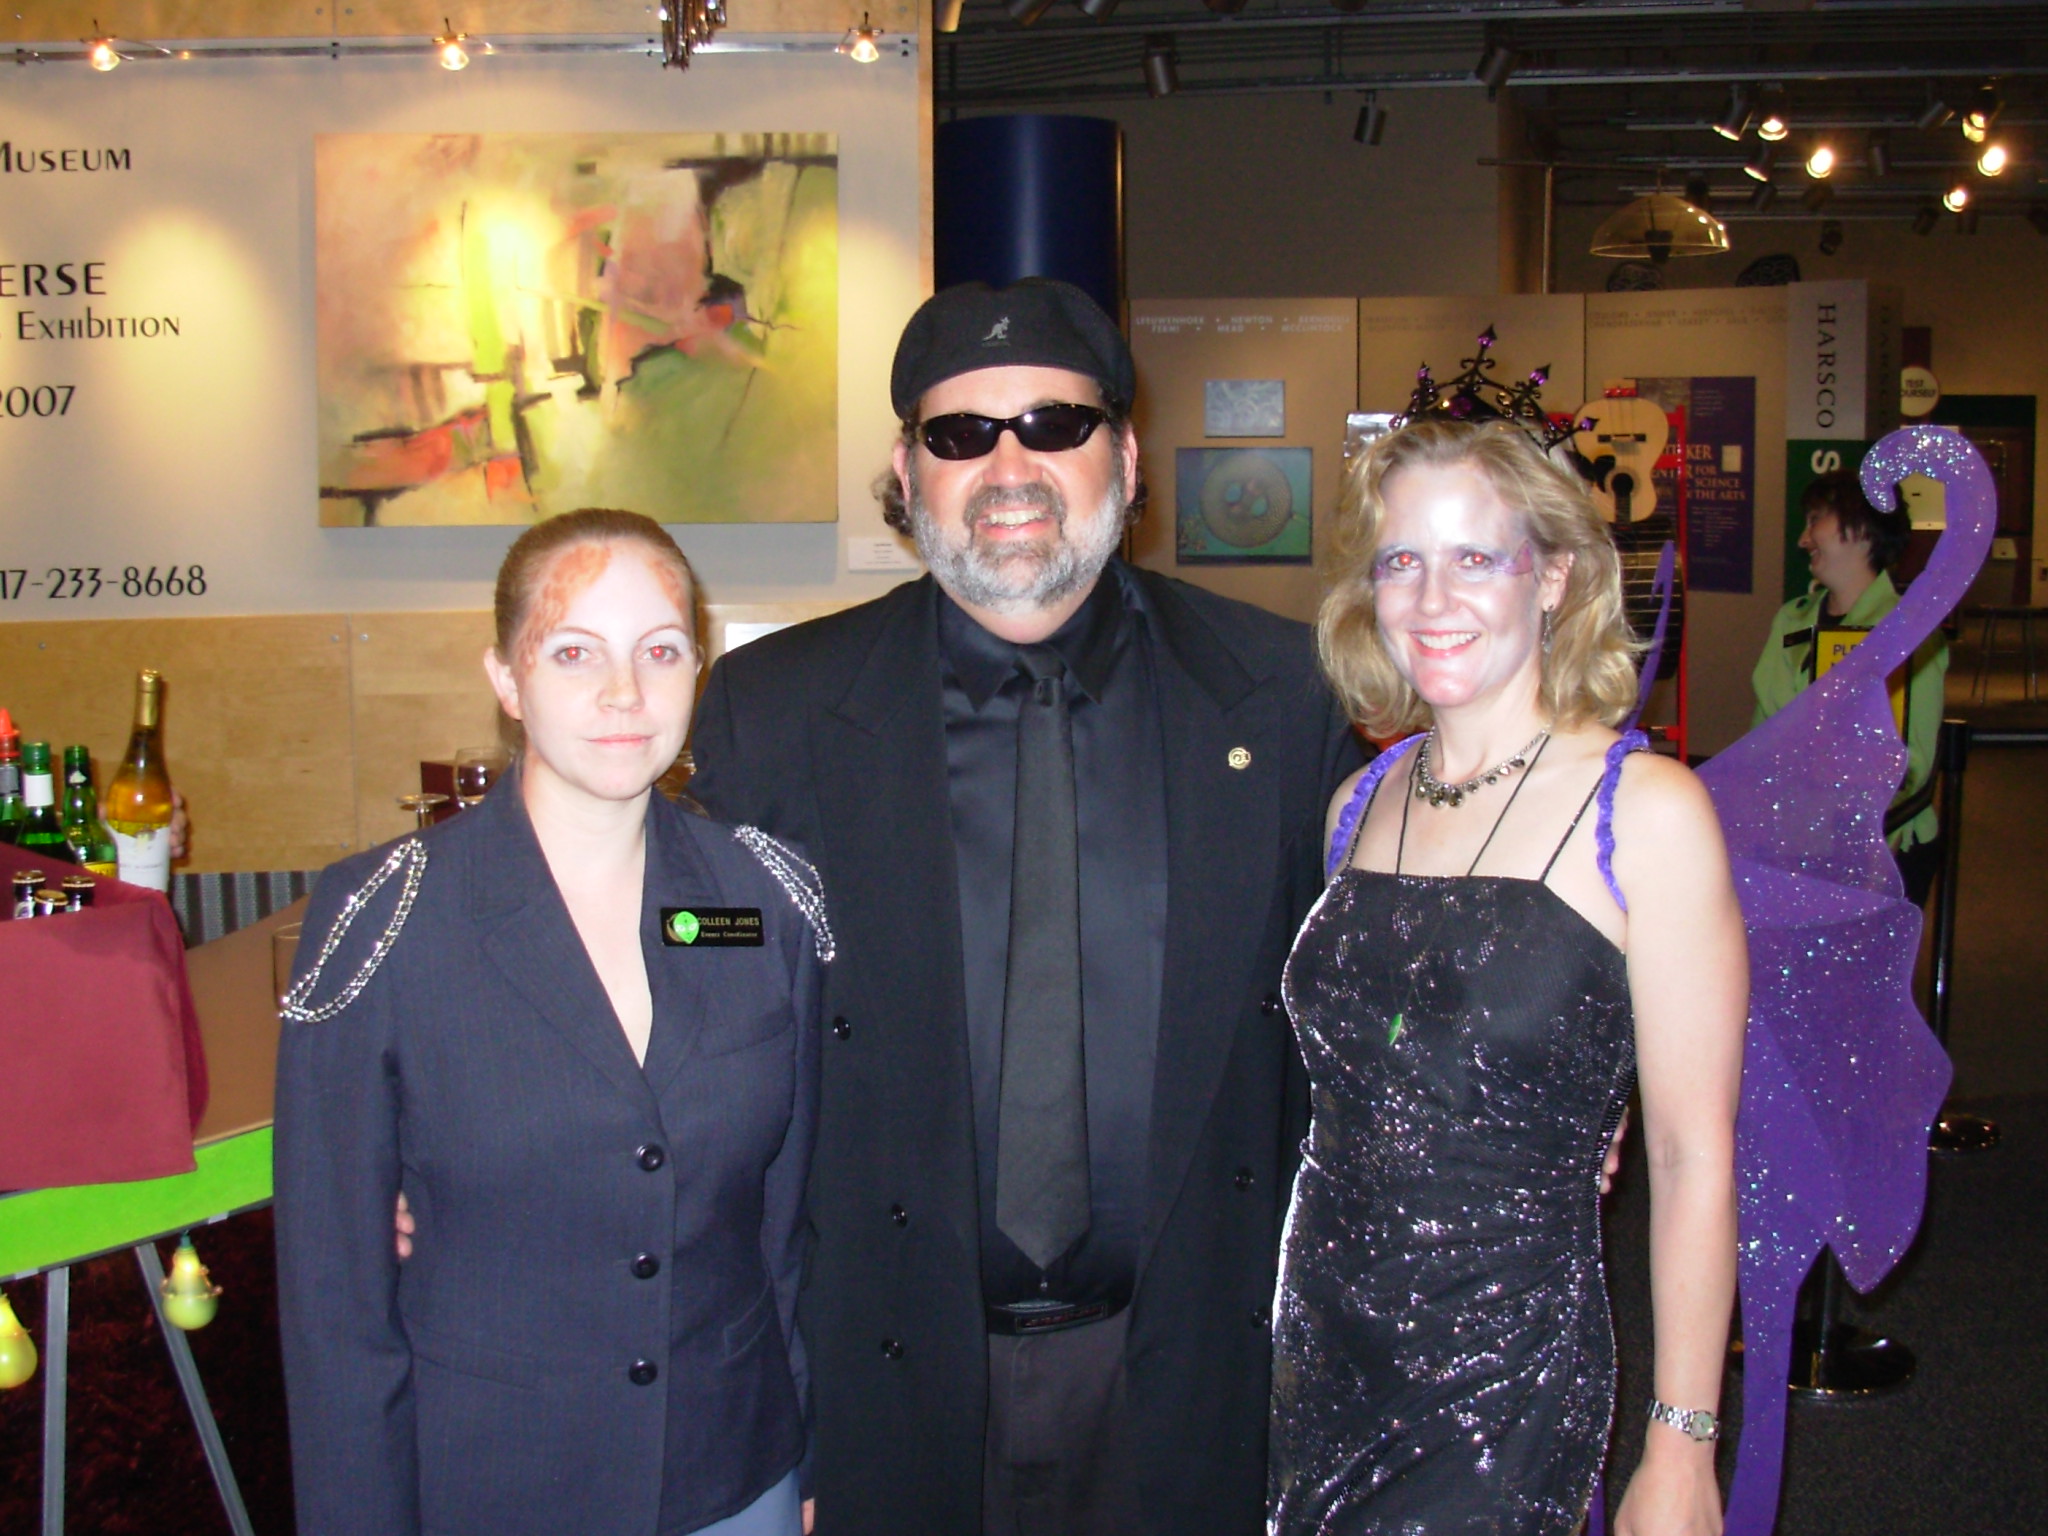 Space exibition at the Whitaker Center...the Wise guy flanked by awfully pretty aliens
